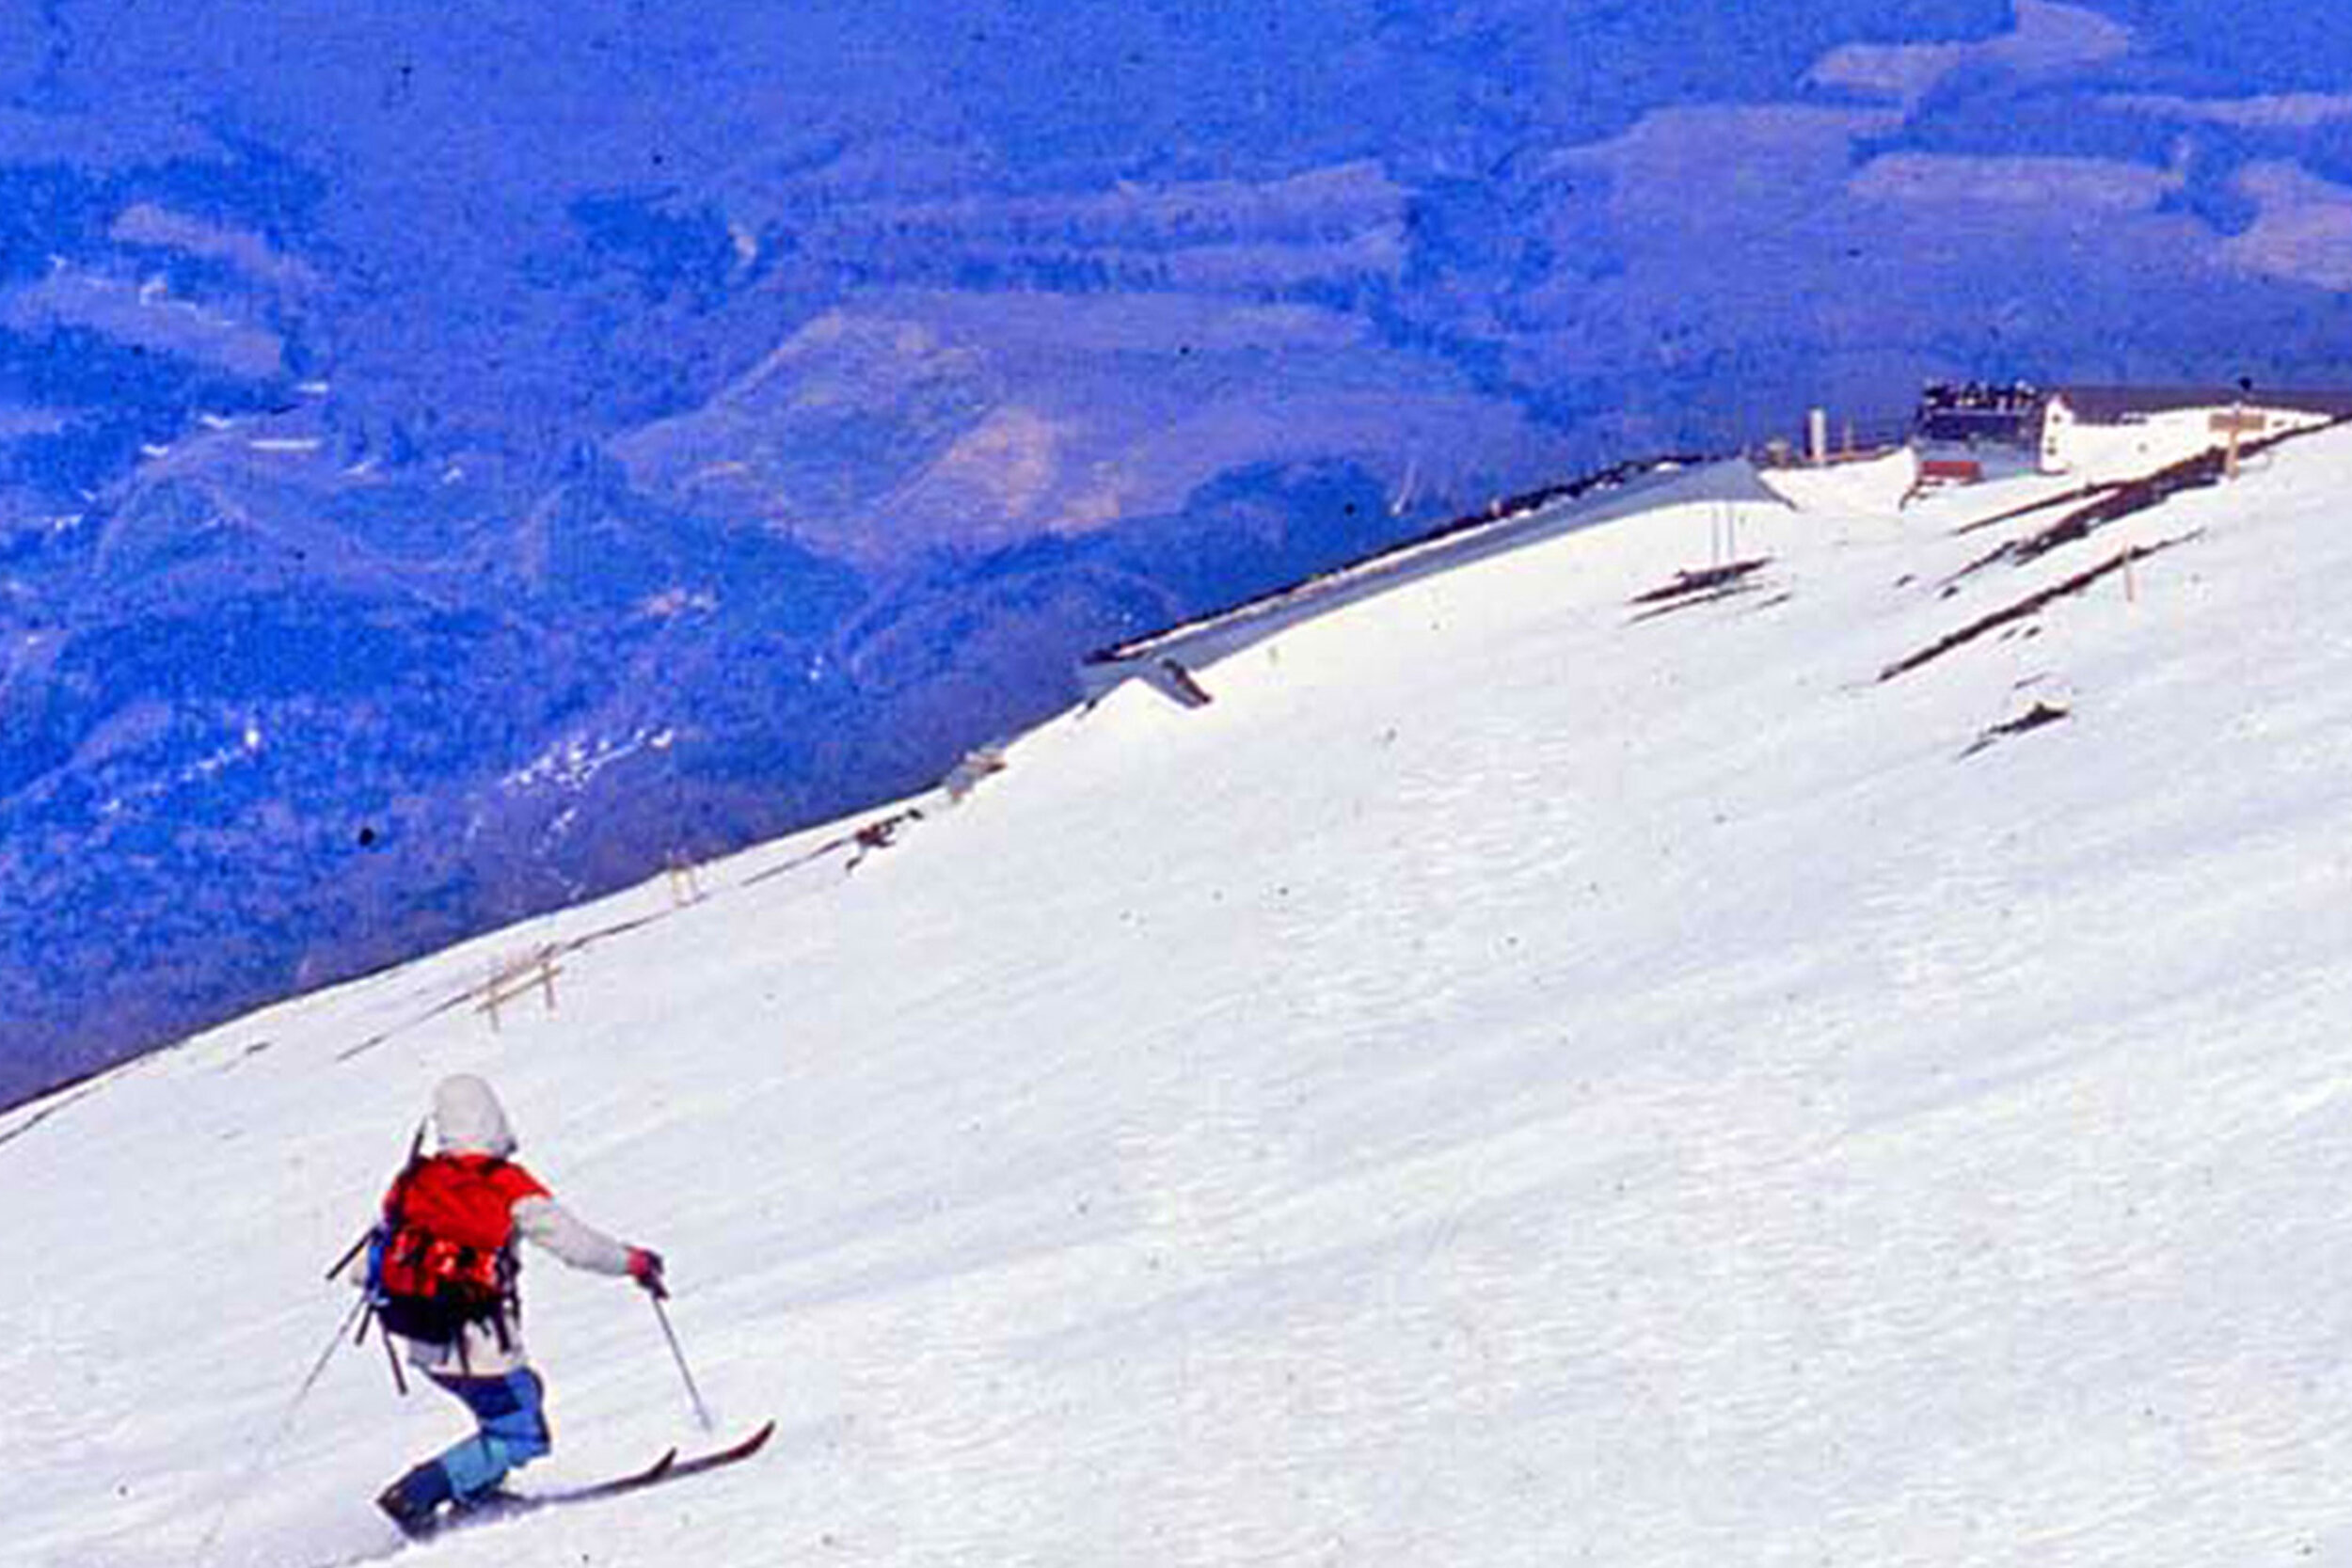  Telemark Descent from Summit of Mt Fuji, 3776m, Japan. 